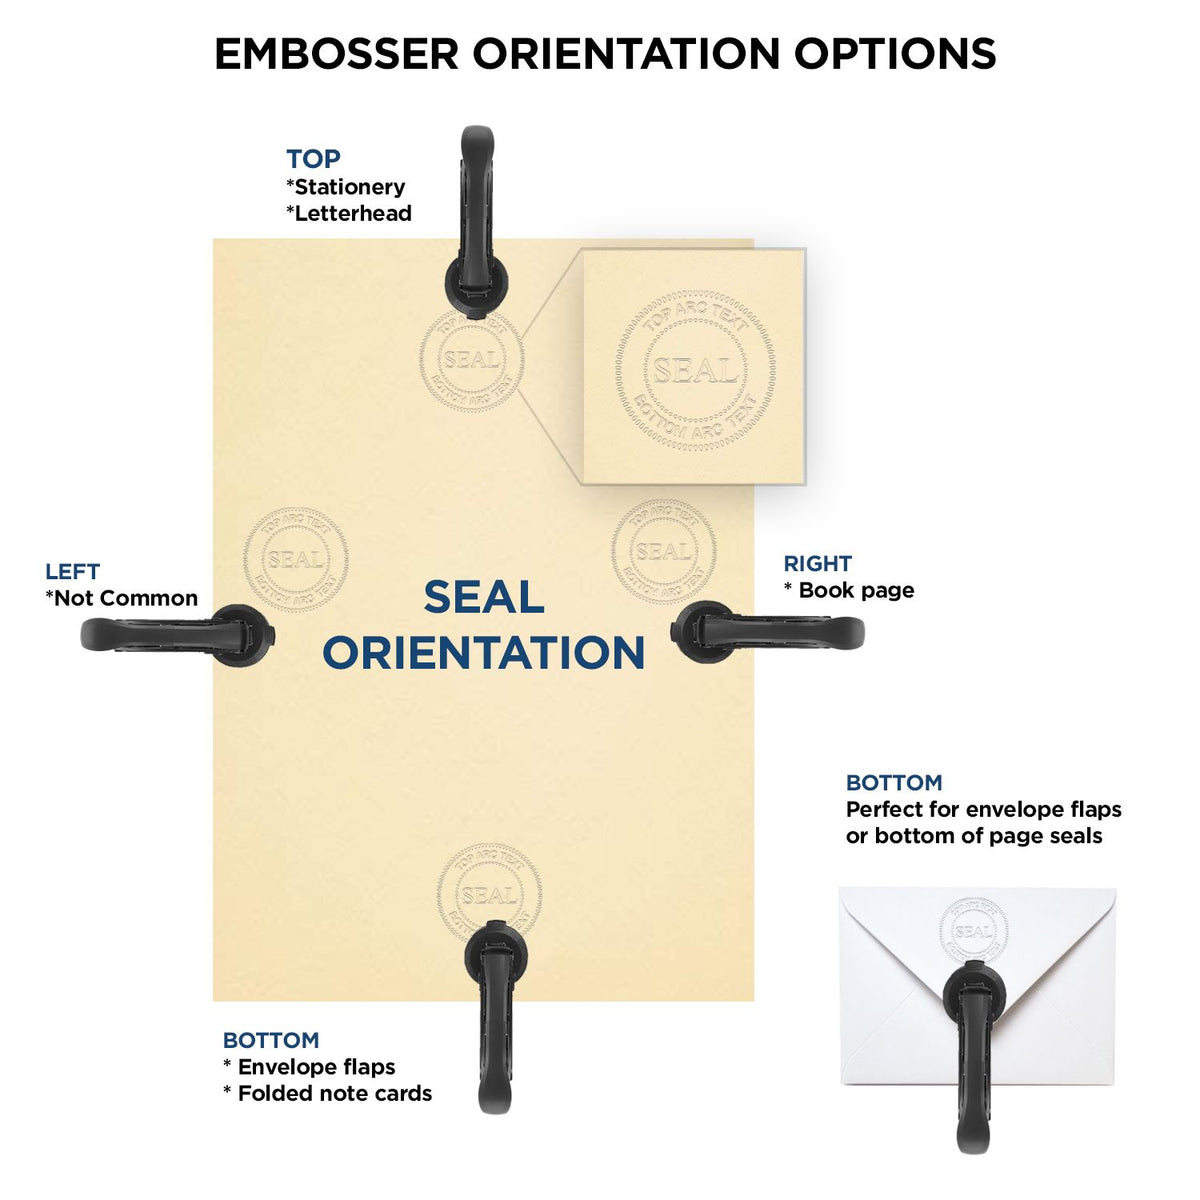 An infographic for the Gift Texas Engineer Seal showing embosser orientation, this is showing examples of a top, bottom, right and left insert.